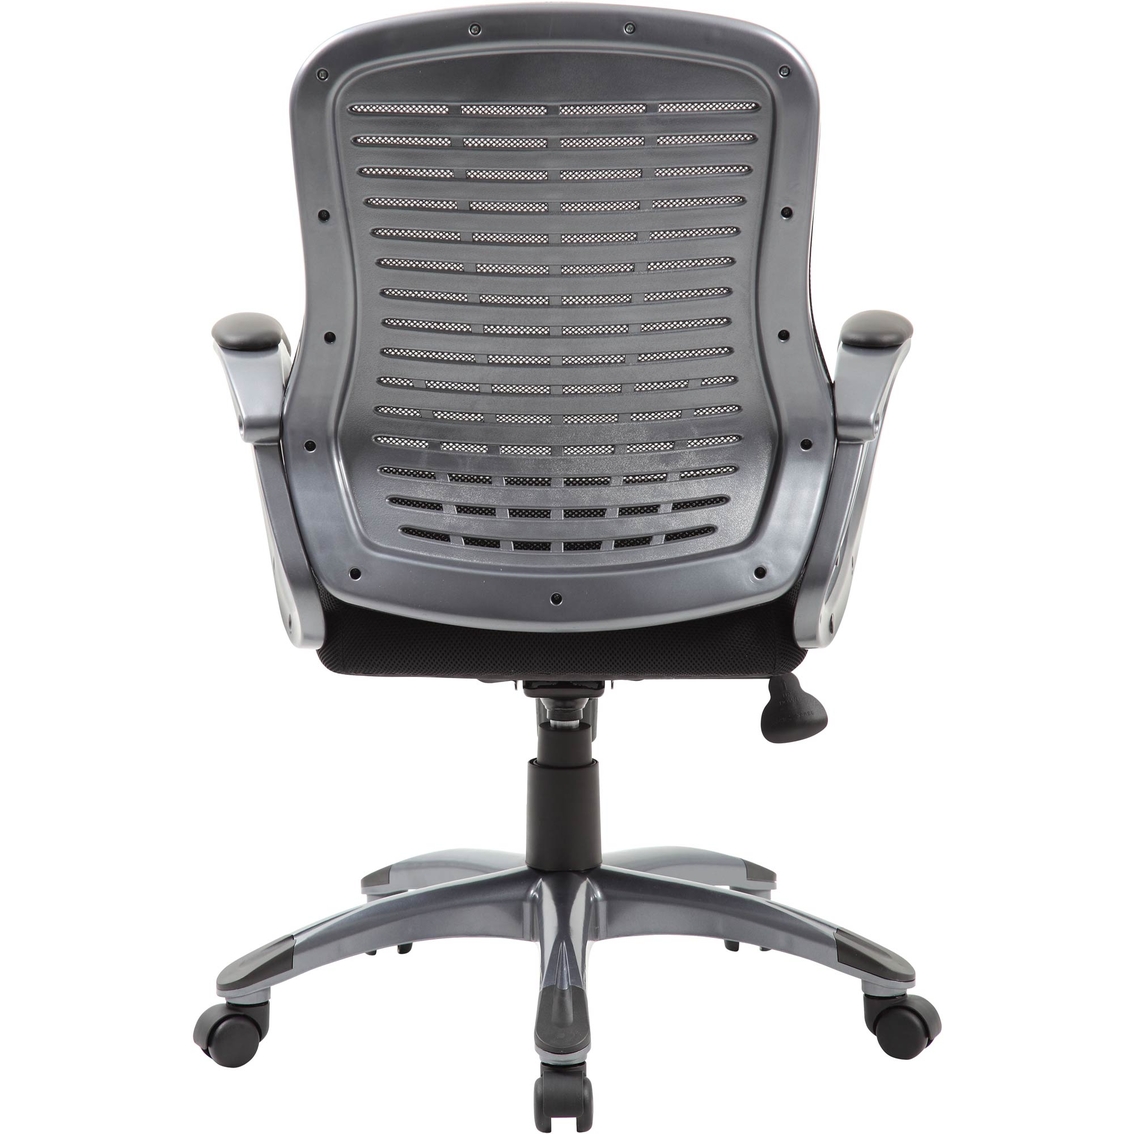 Presidential Seating Mesh Chair - Image 2 of 4